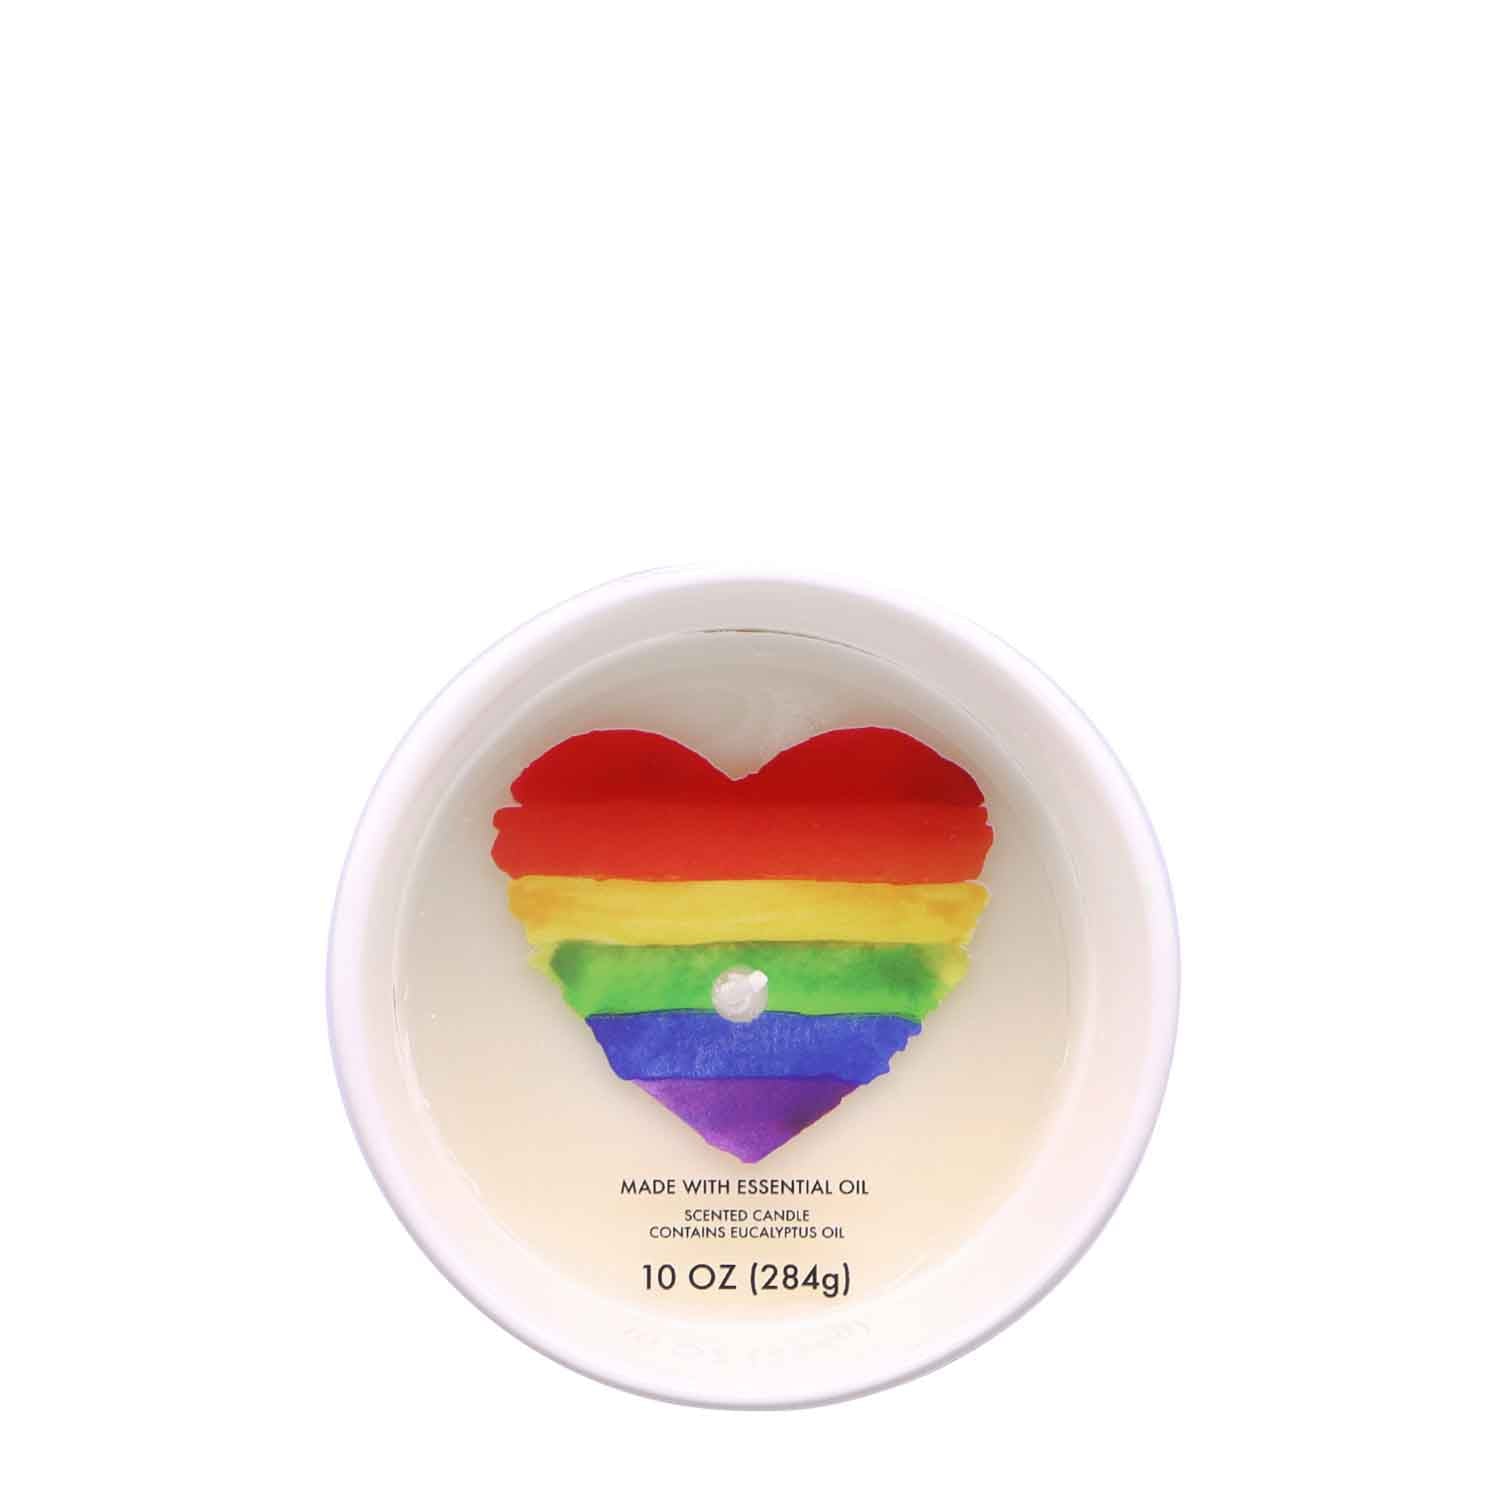 Introducing the Rainbow Heart Scented Ceramic Candle (10 oz) - Pride Collection from Tuscany Candle® SEASONAL - a heart-shaped candle featuring a mesmerizing rainbow heart design and infused with the refreshing scent of eucalyptus fragrance.